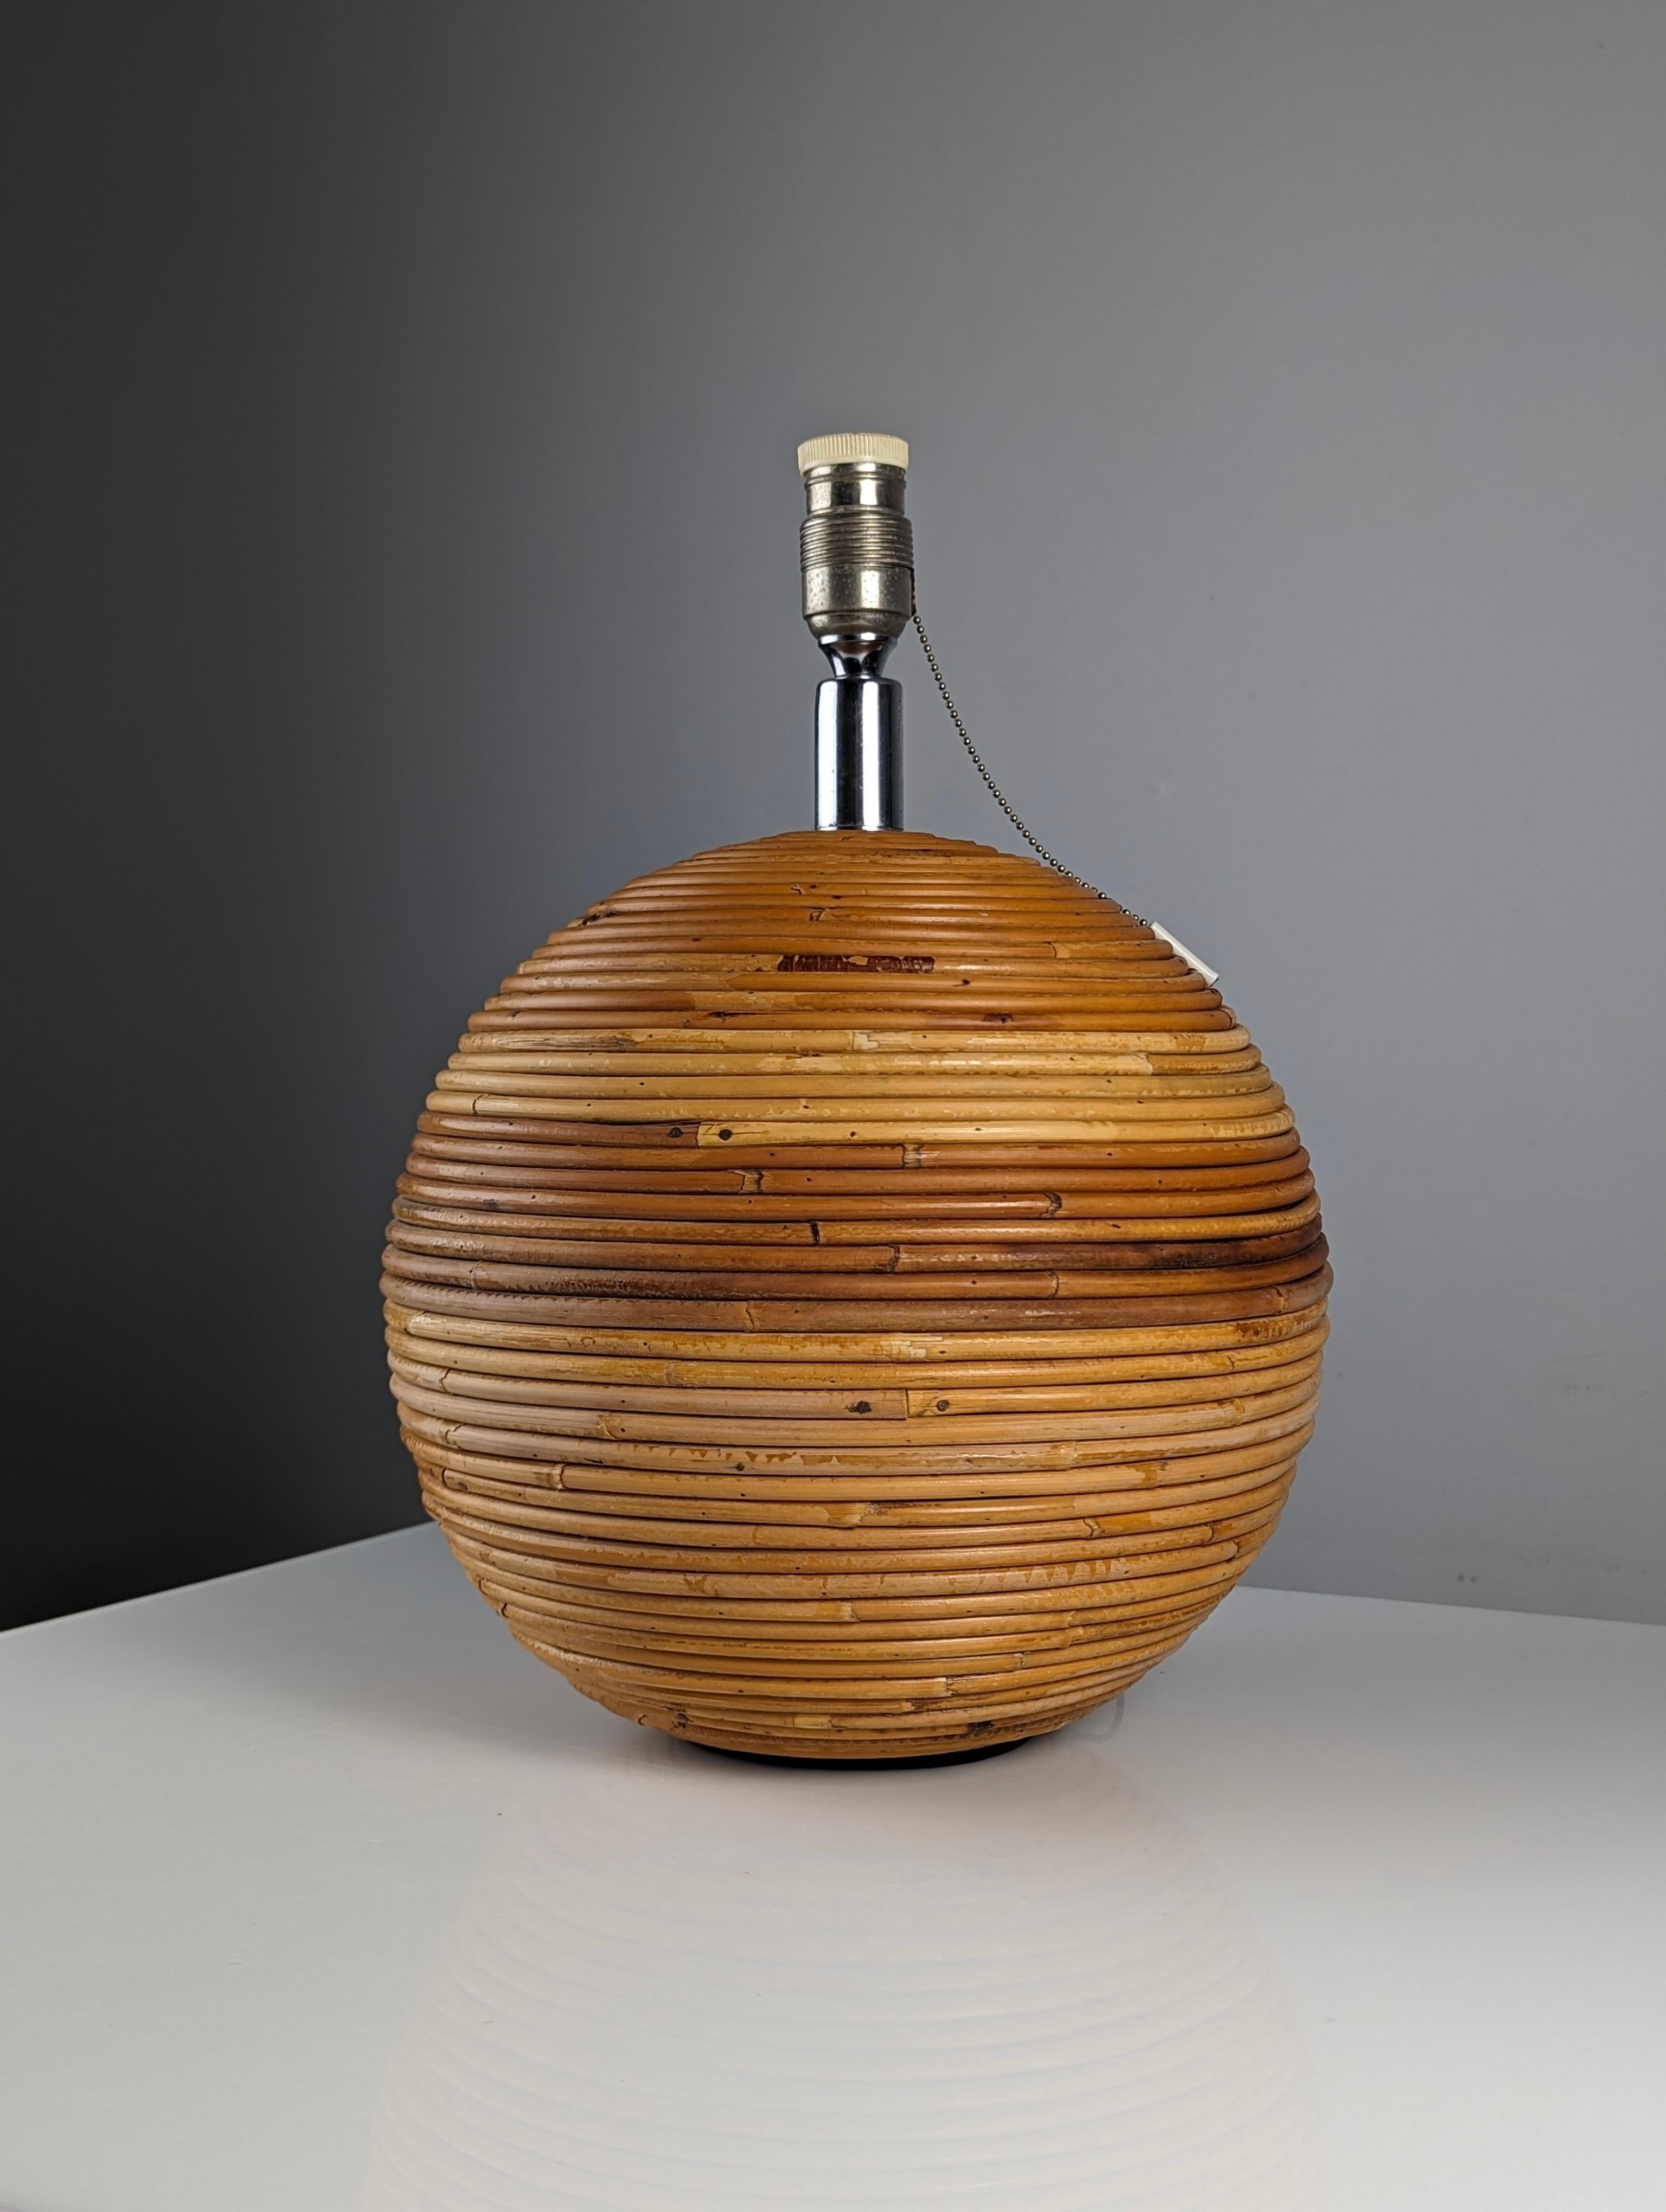 Beautiful curved rattan lamp in the shape of a sphere in the style of the great and beautiful designs of Gabriela Crespi. A piece of natural and welcoming beauty.